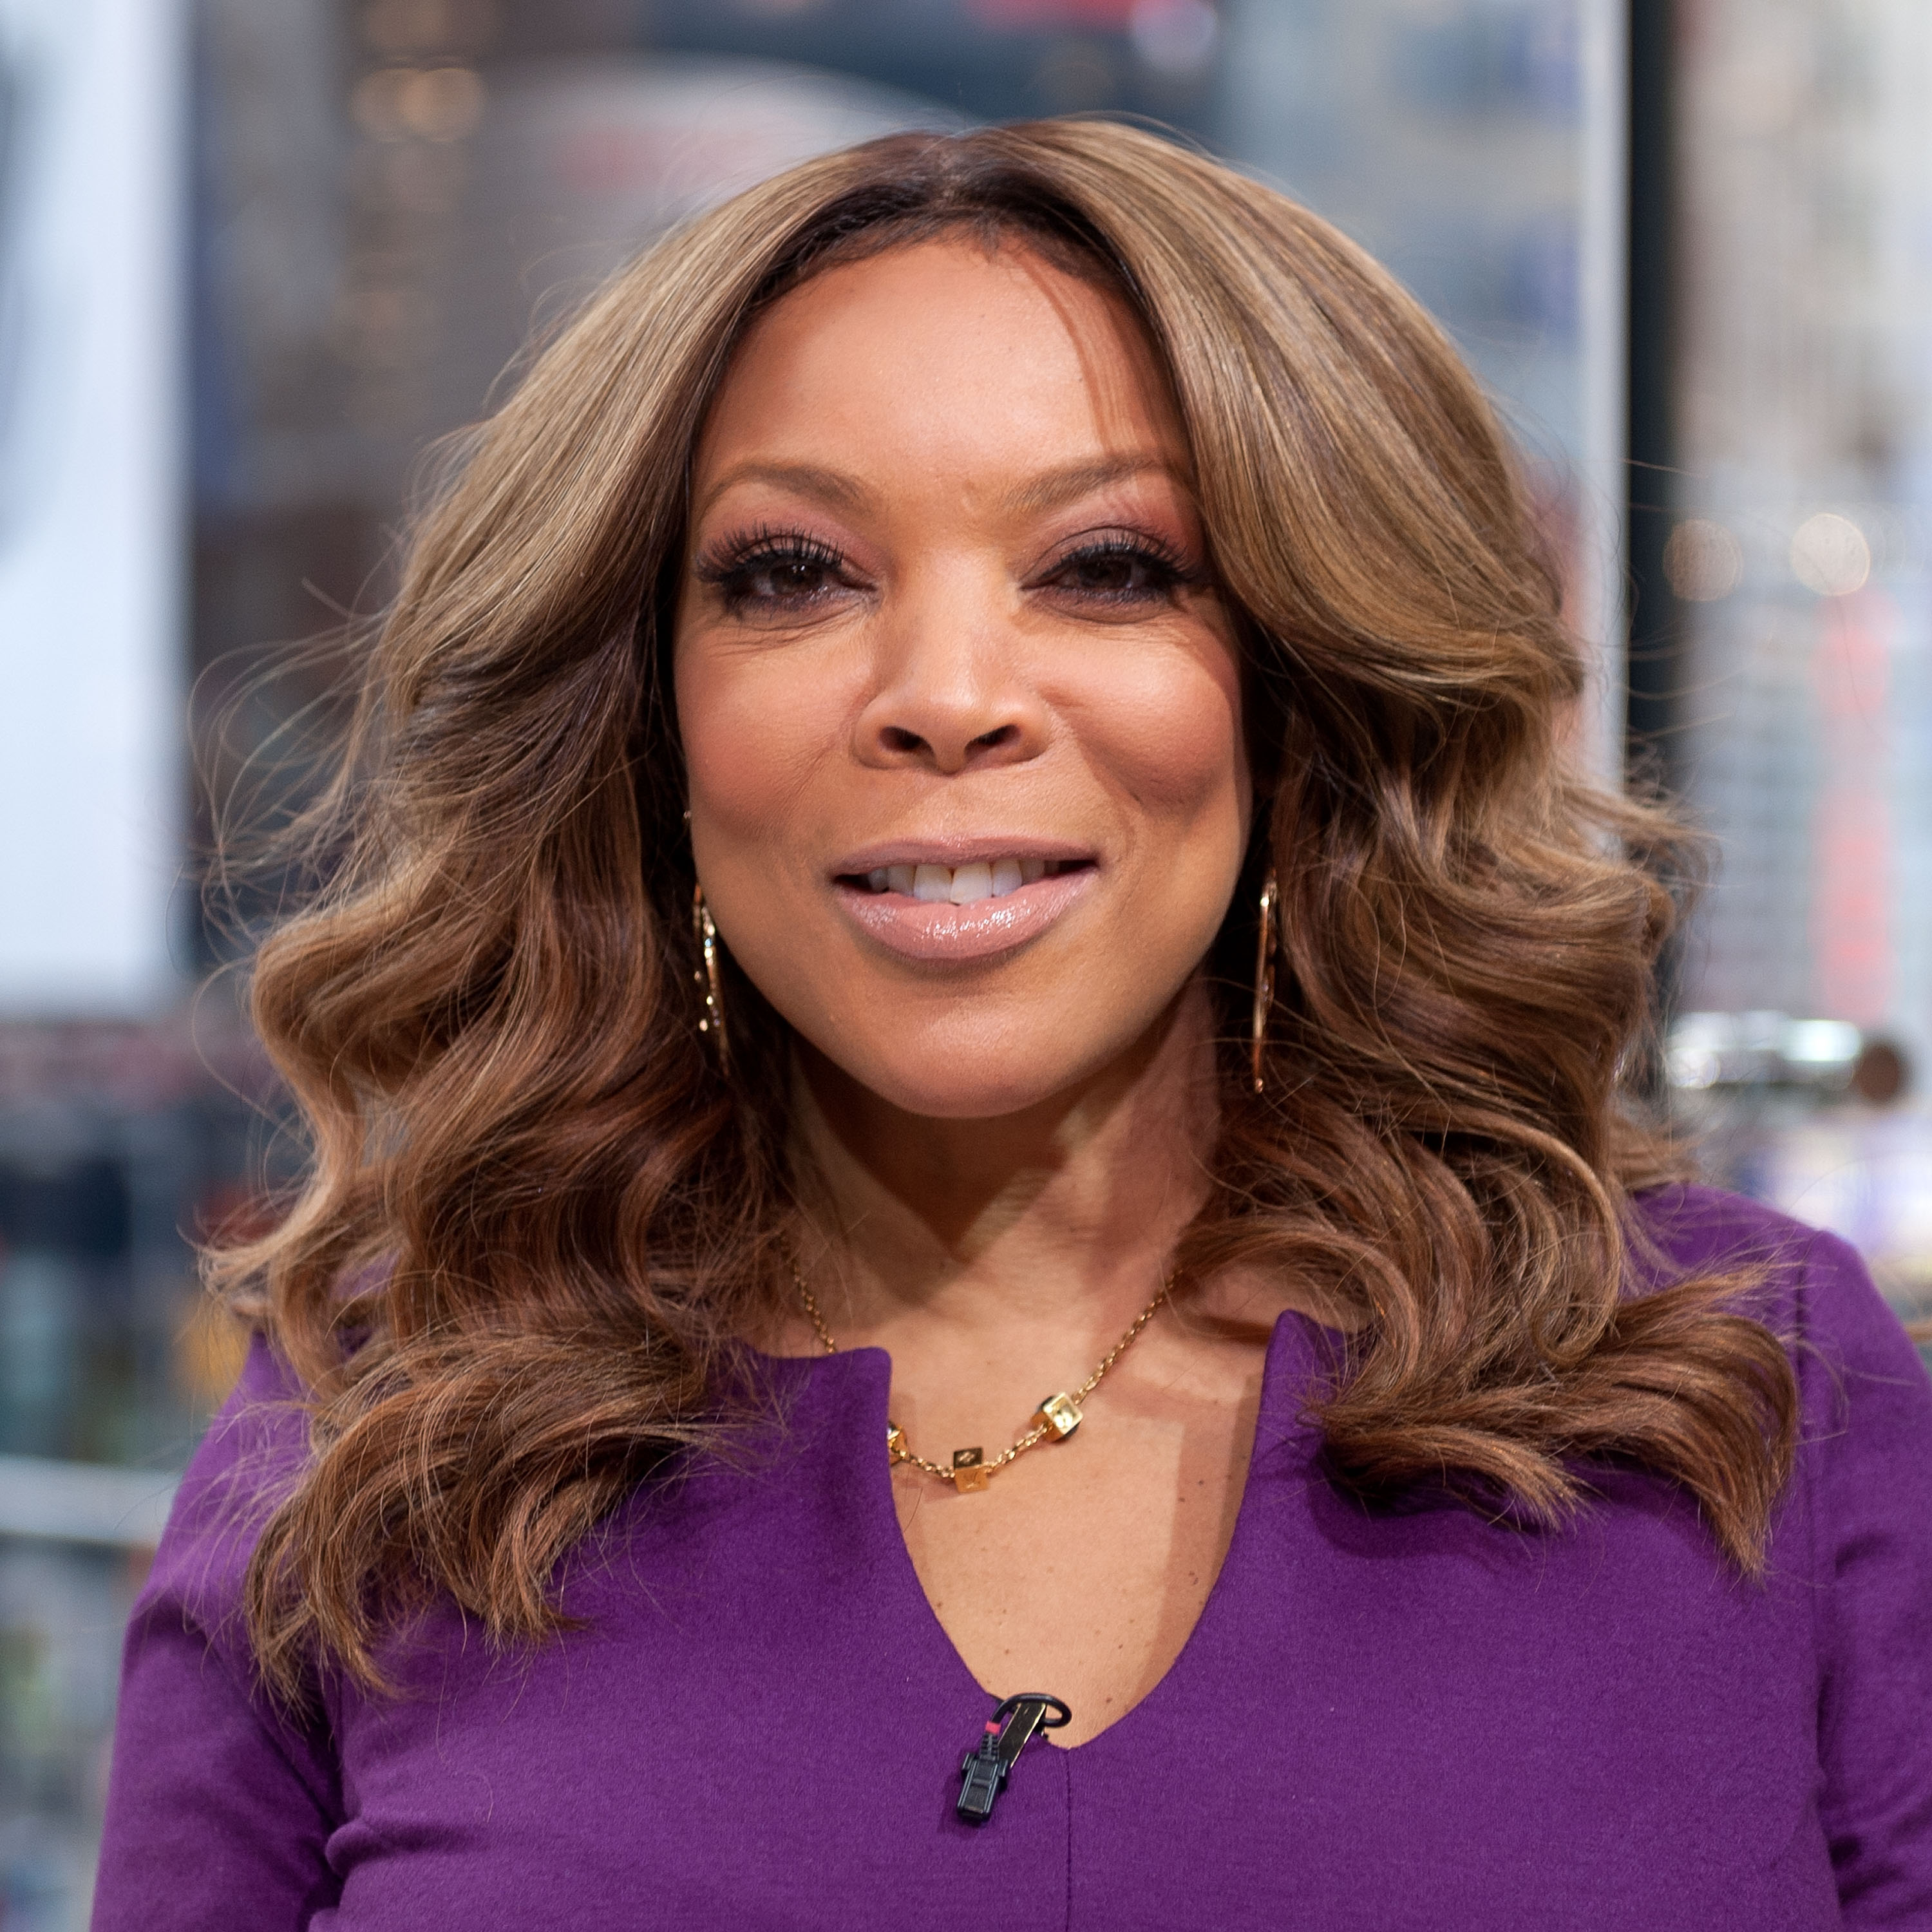 Wendy Williams at the New York studio of "Extra" in 2015. | Photo: Getty Images